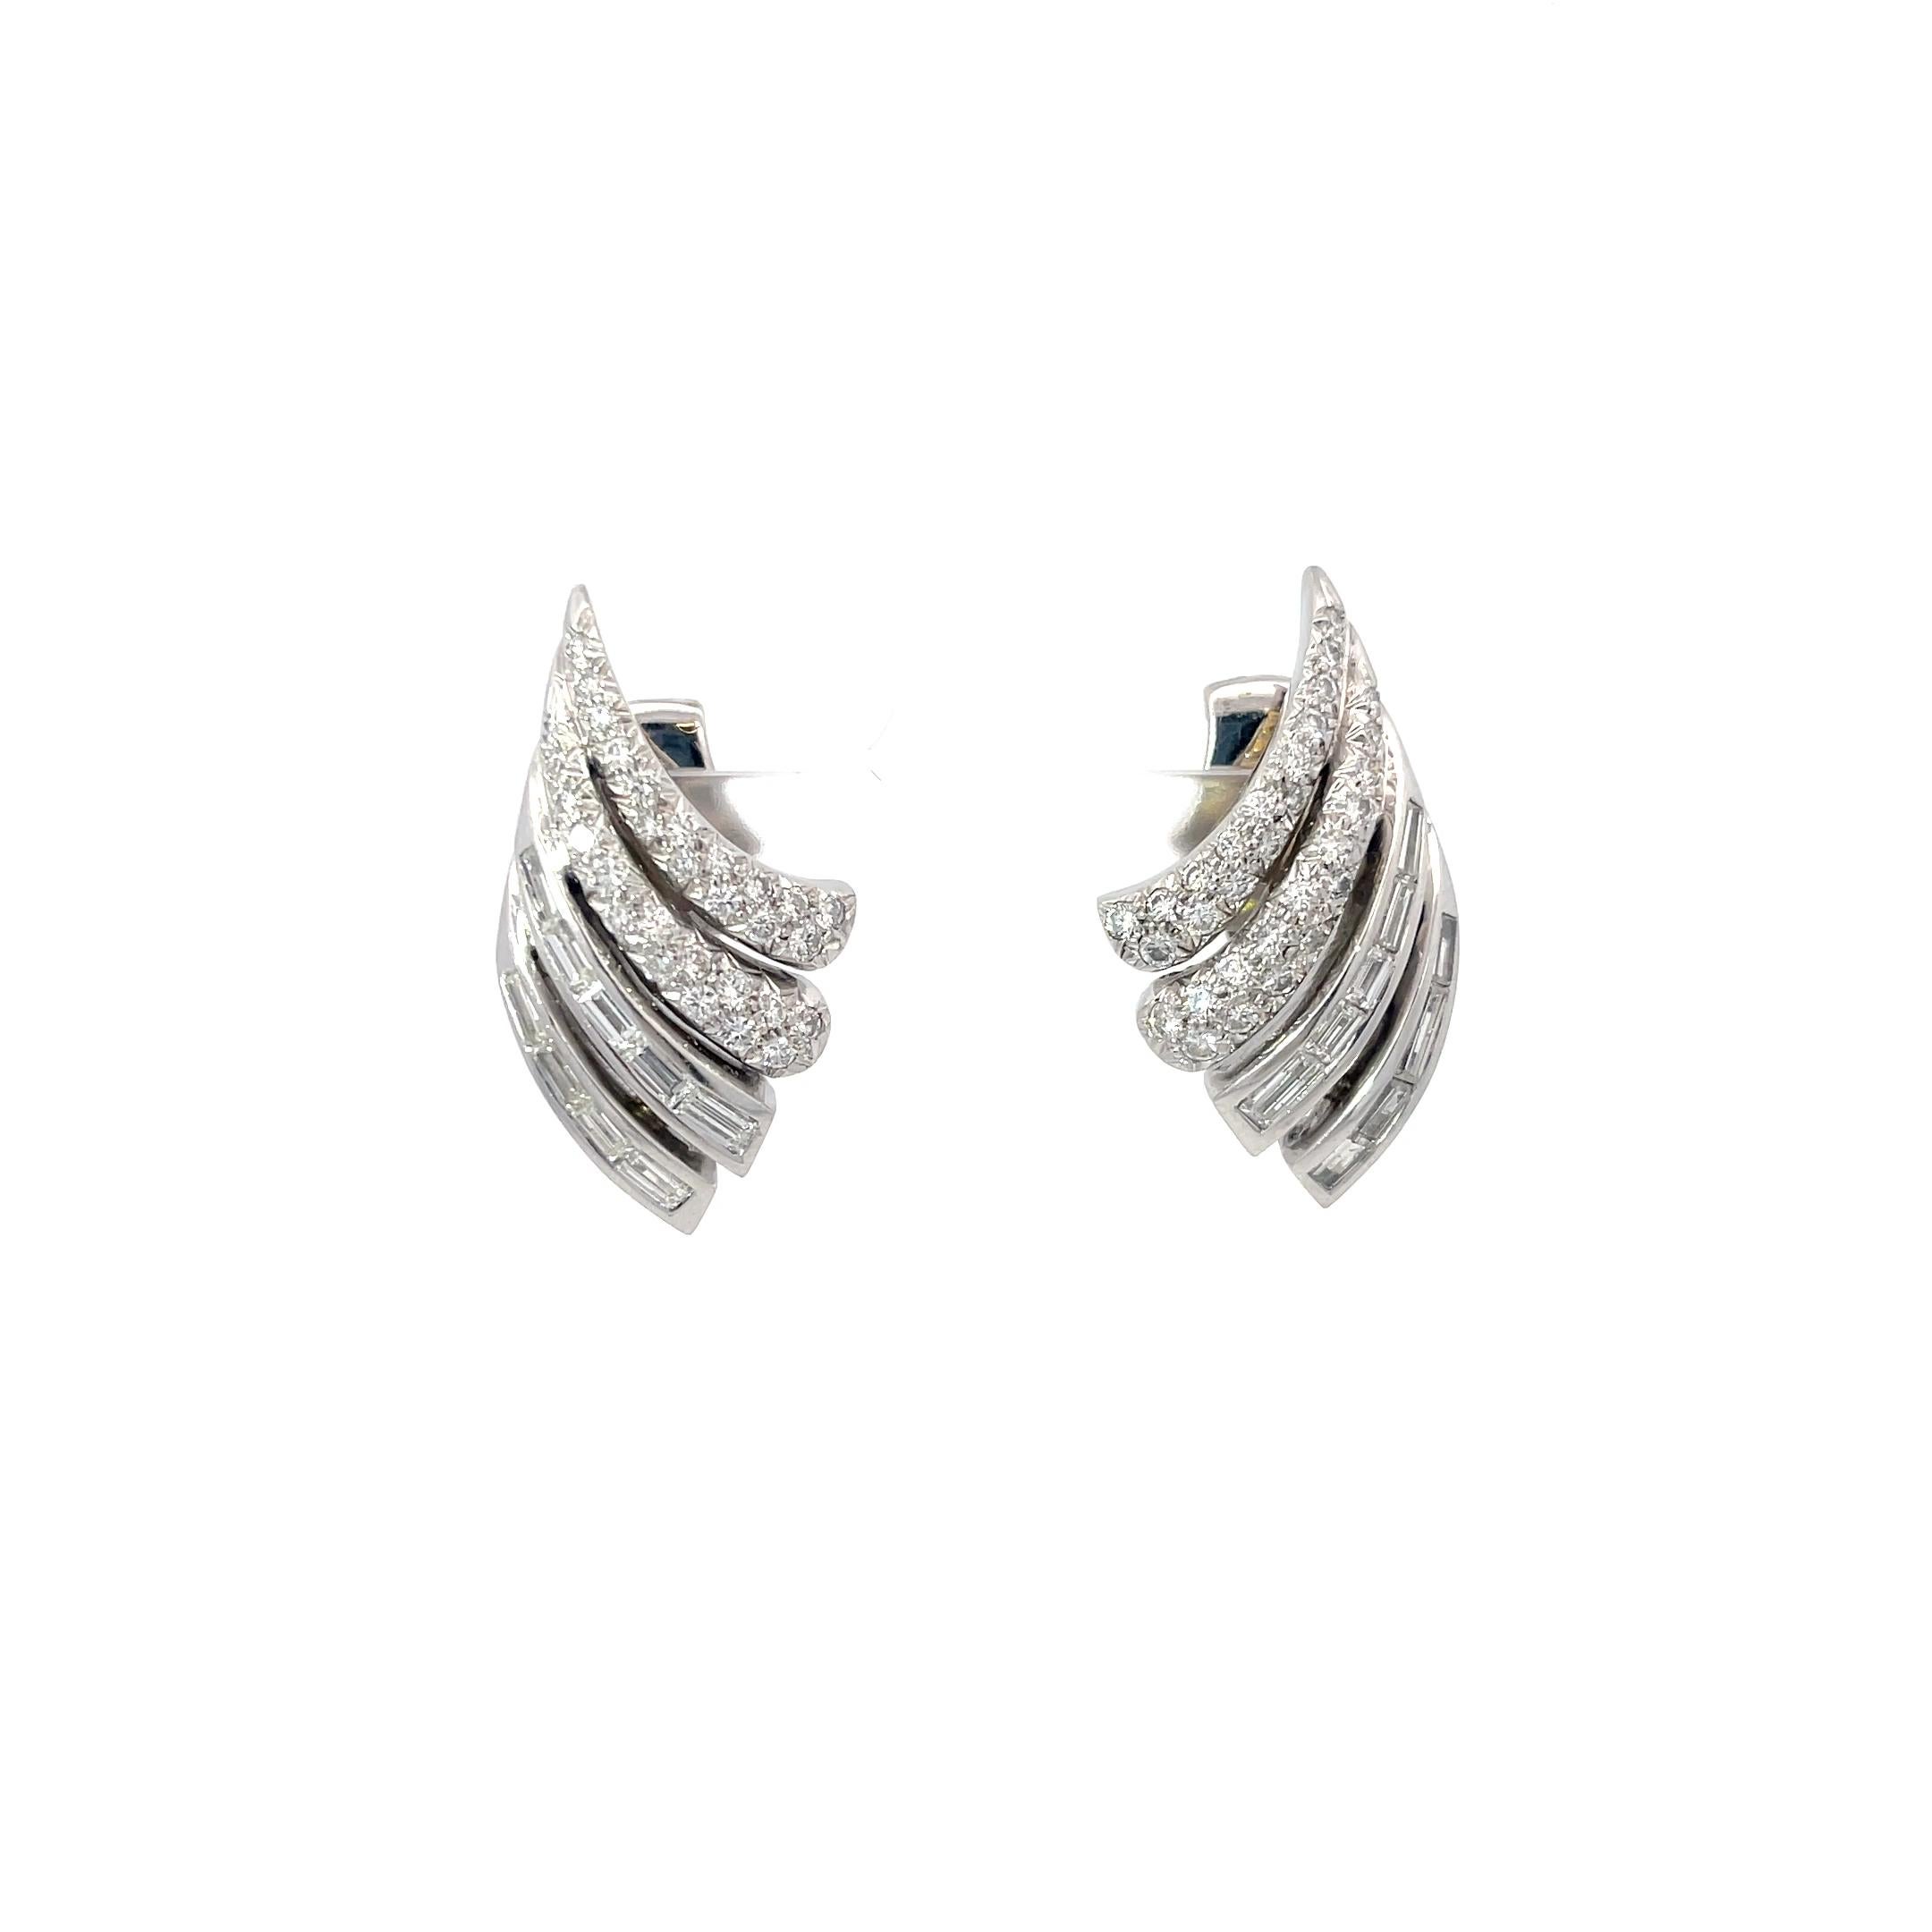 Andrew Clunn Diamond Earrings in Platinum. The earrings feature 3ctw of brilliant round and baguette diamonds. 
1.50